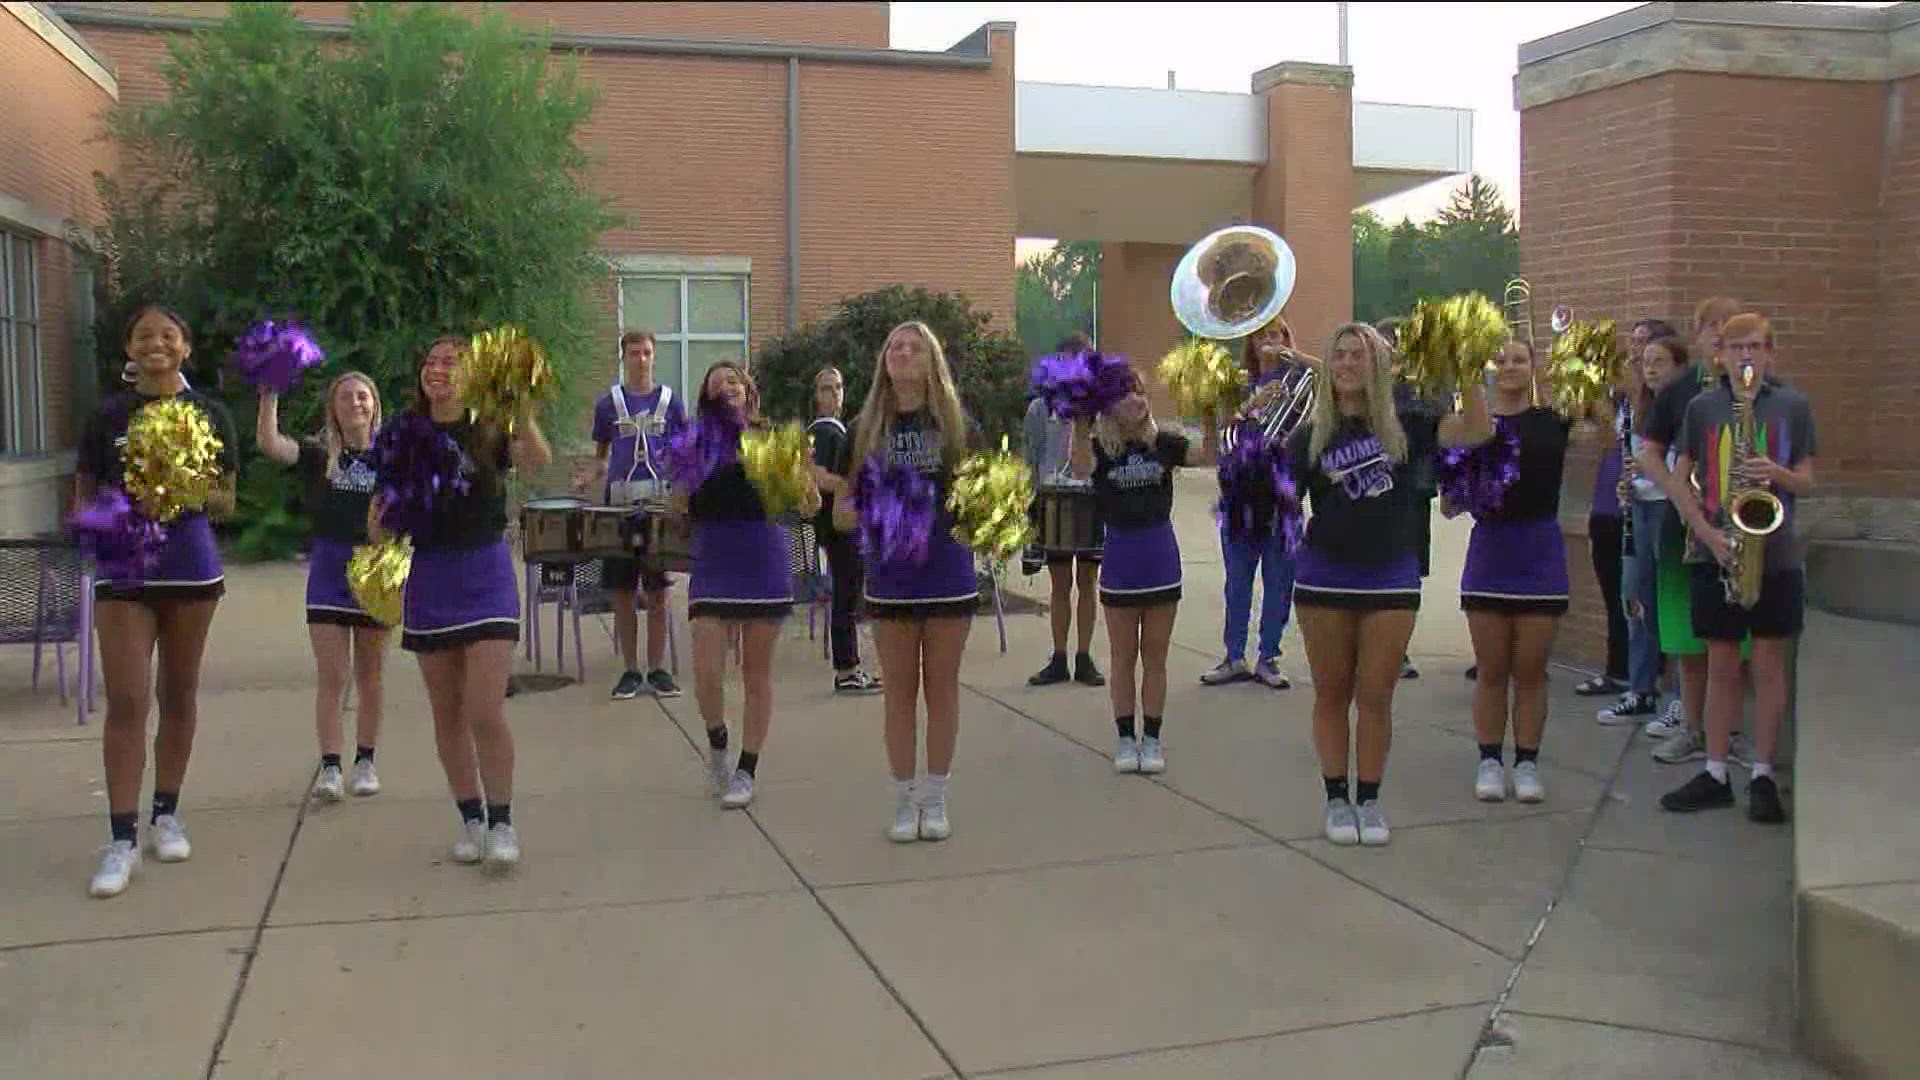 Our Zeinab Cheaib visits Maumee High School as they celebrate the first week of classes.